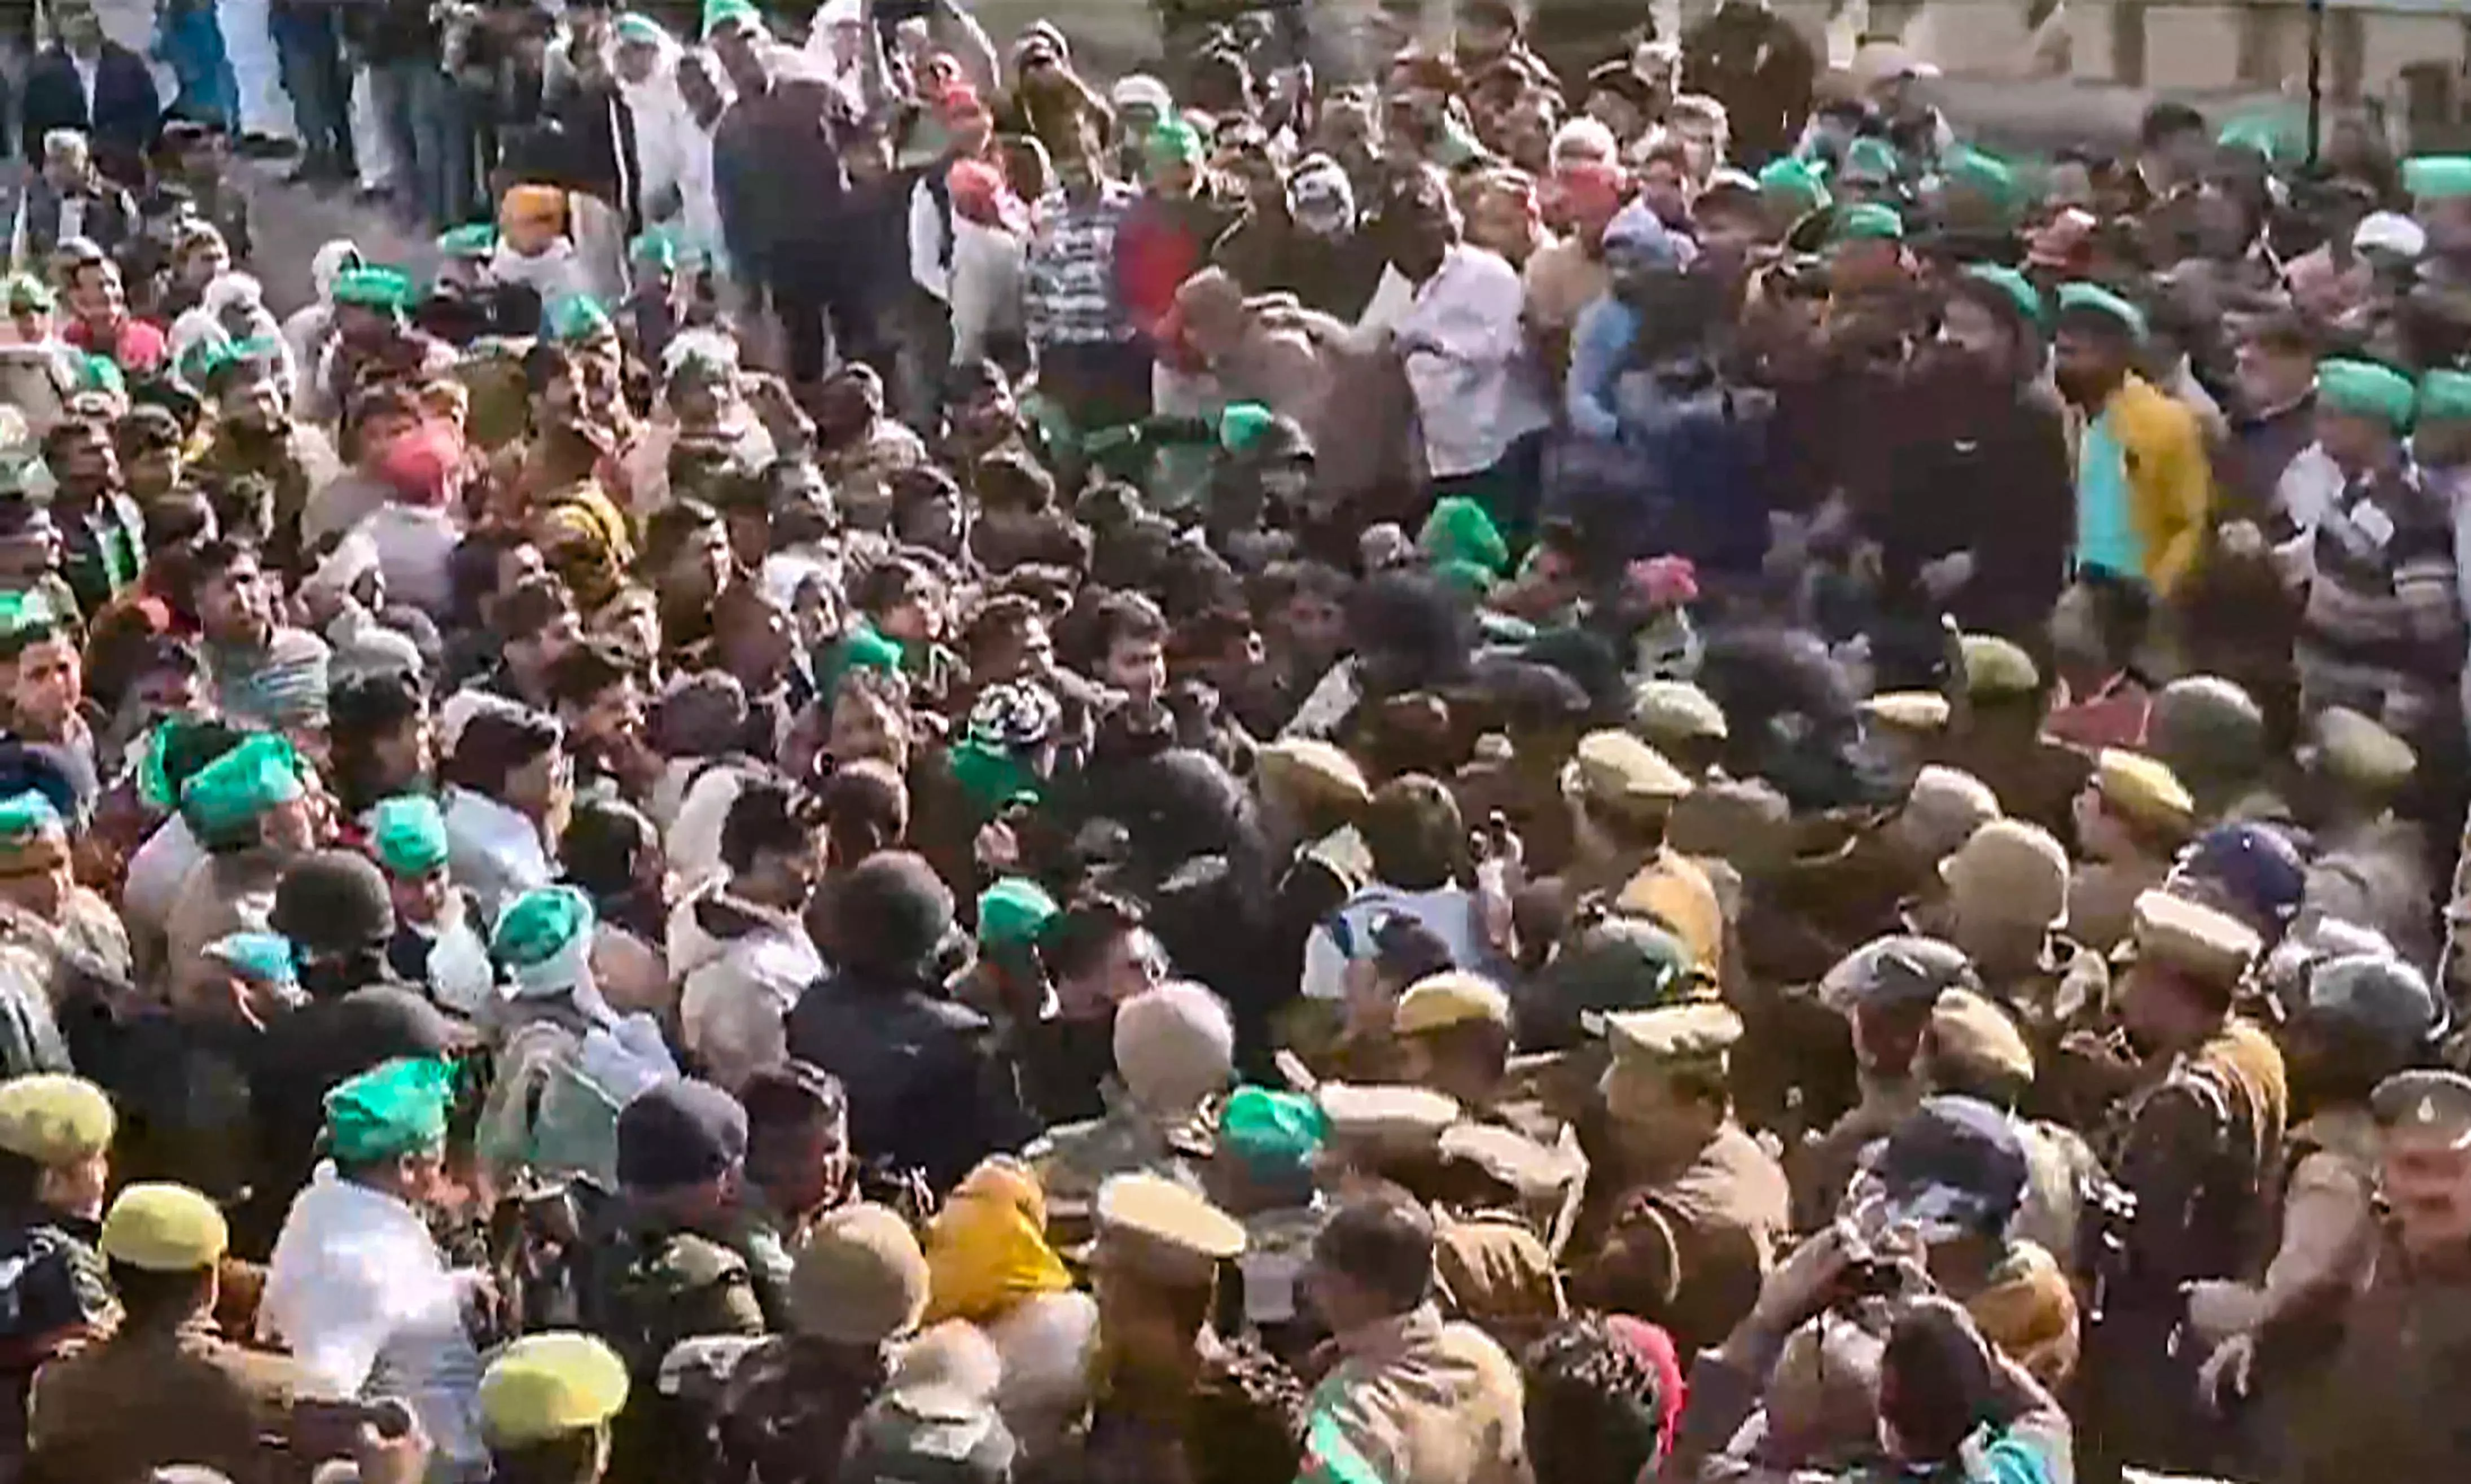 Noida farmers hold protest march amid heavy security, traffic at Chilla border hit